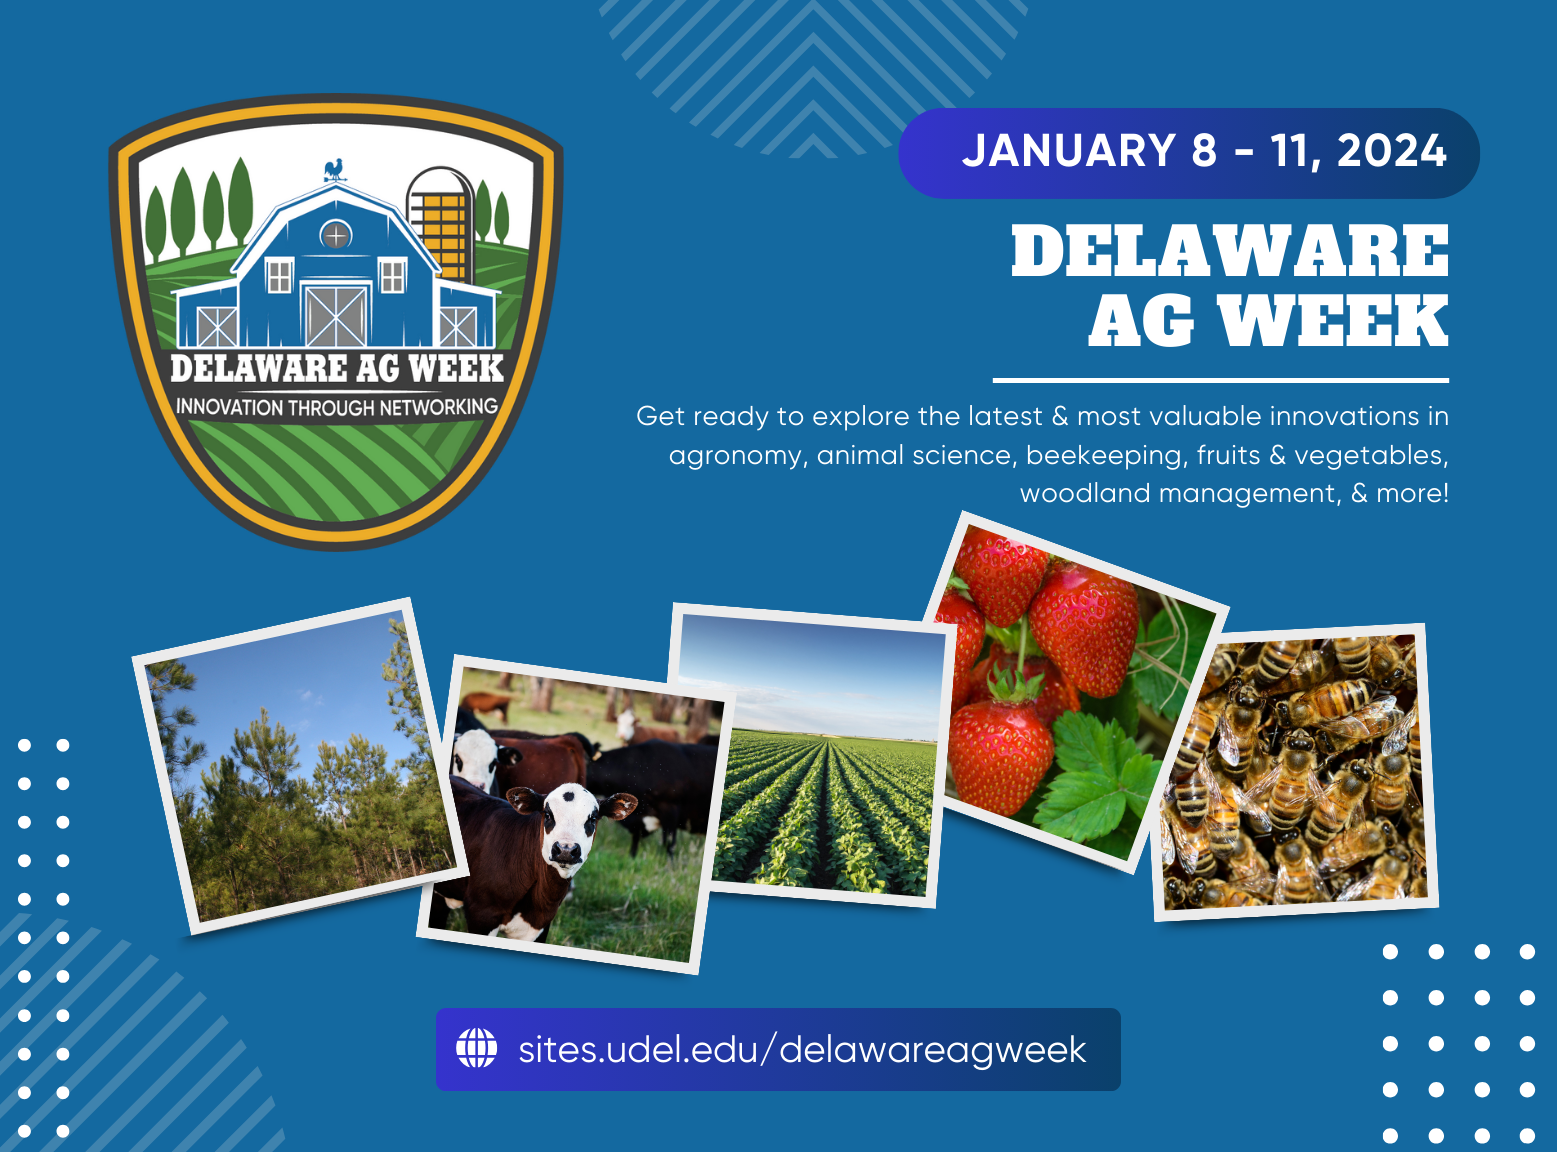 January 8-11, 2024, Delaware Ag Week, Get ready to explore the latest and most valuable innovations in agronomy, animal science, beekeeping, fruits and vegetables, woodland management, and more! sites.udel.edu/delawareagweek